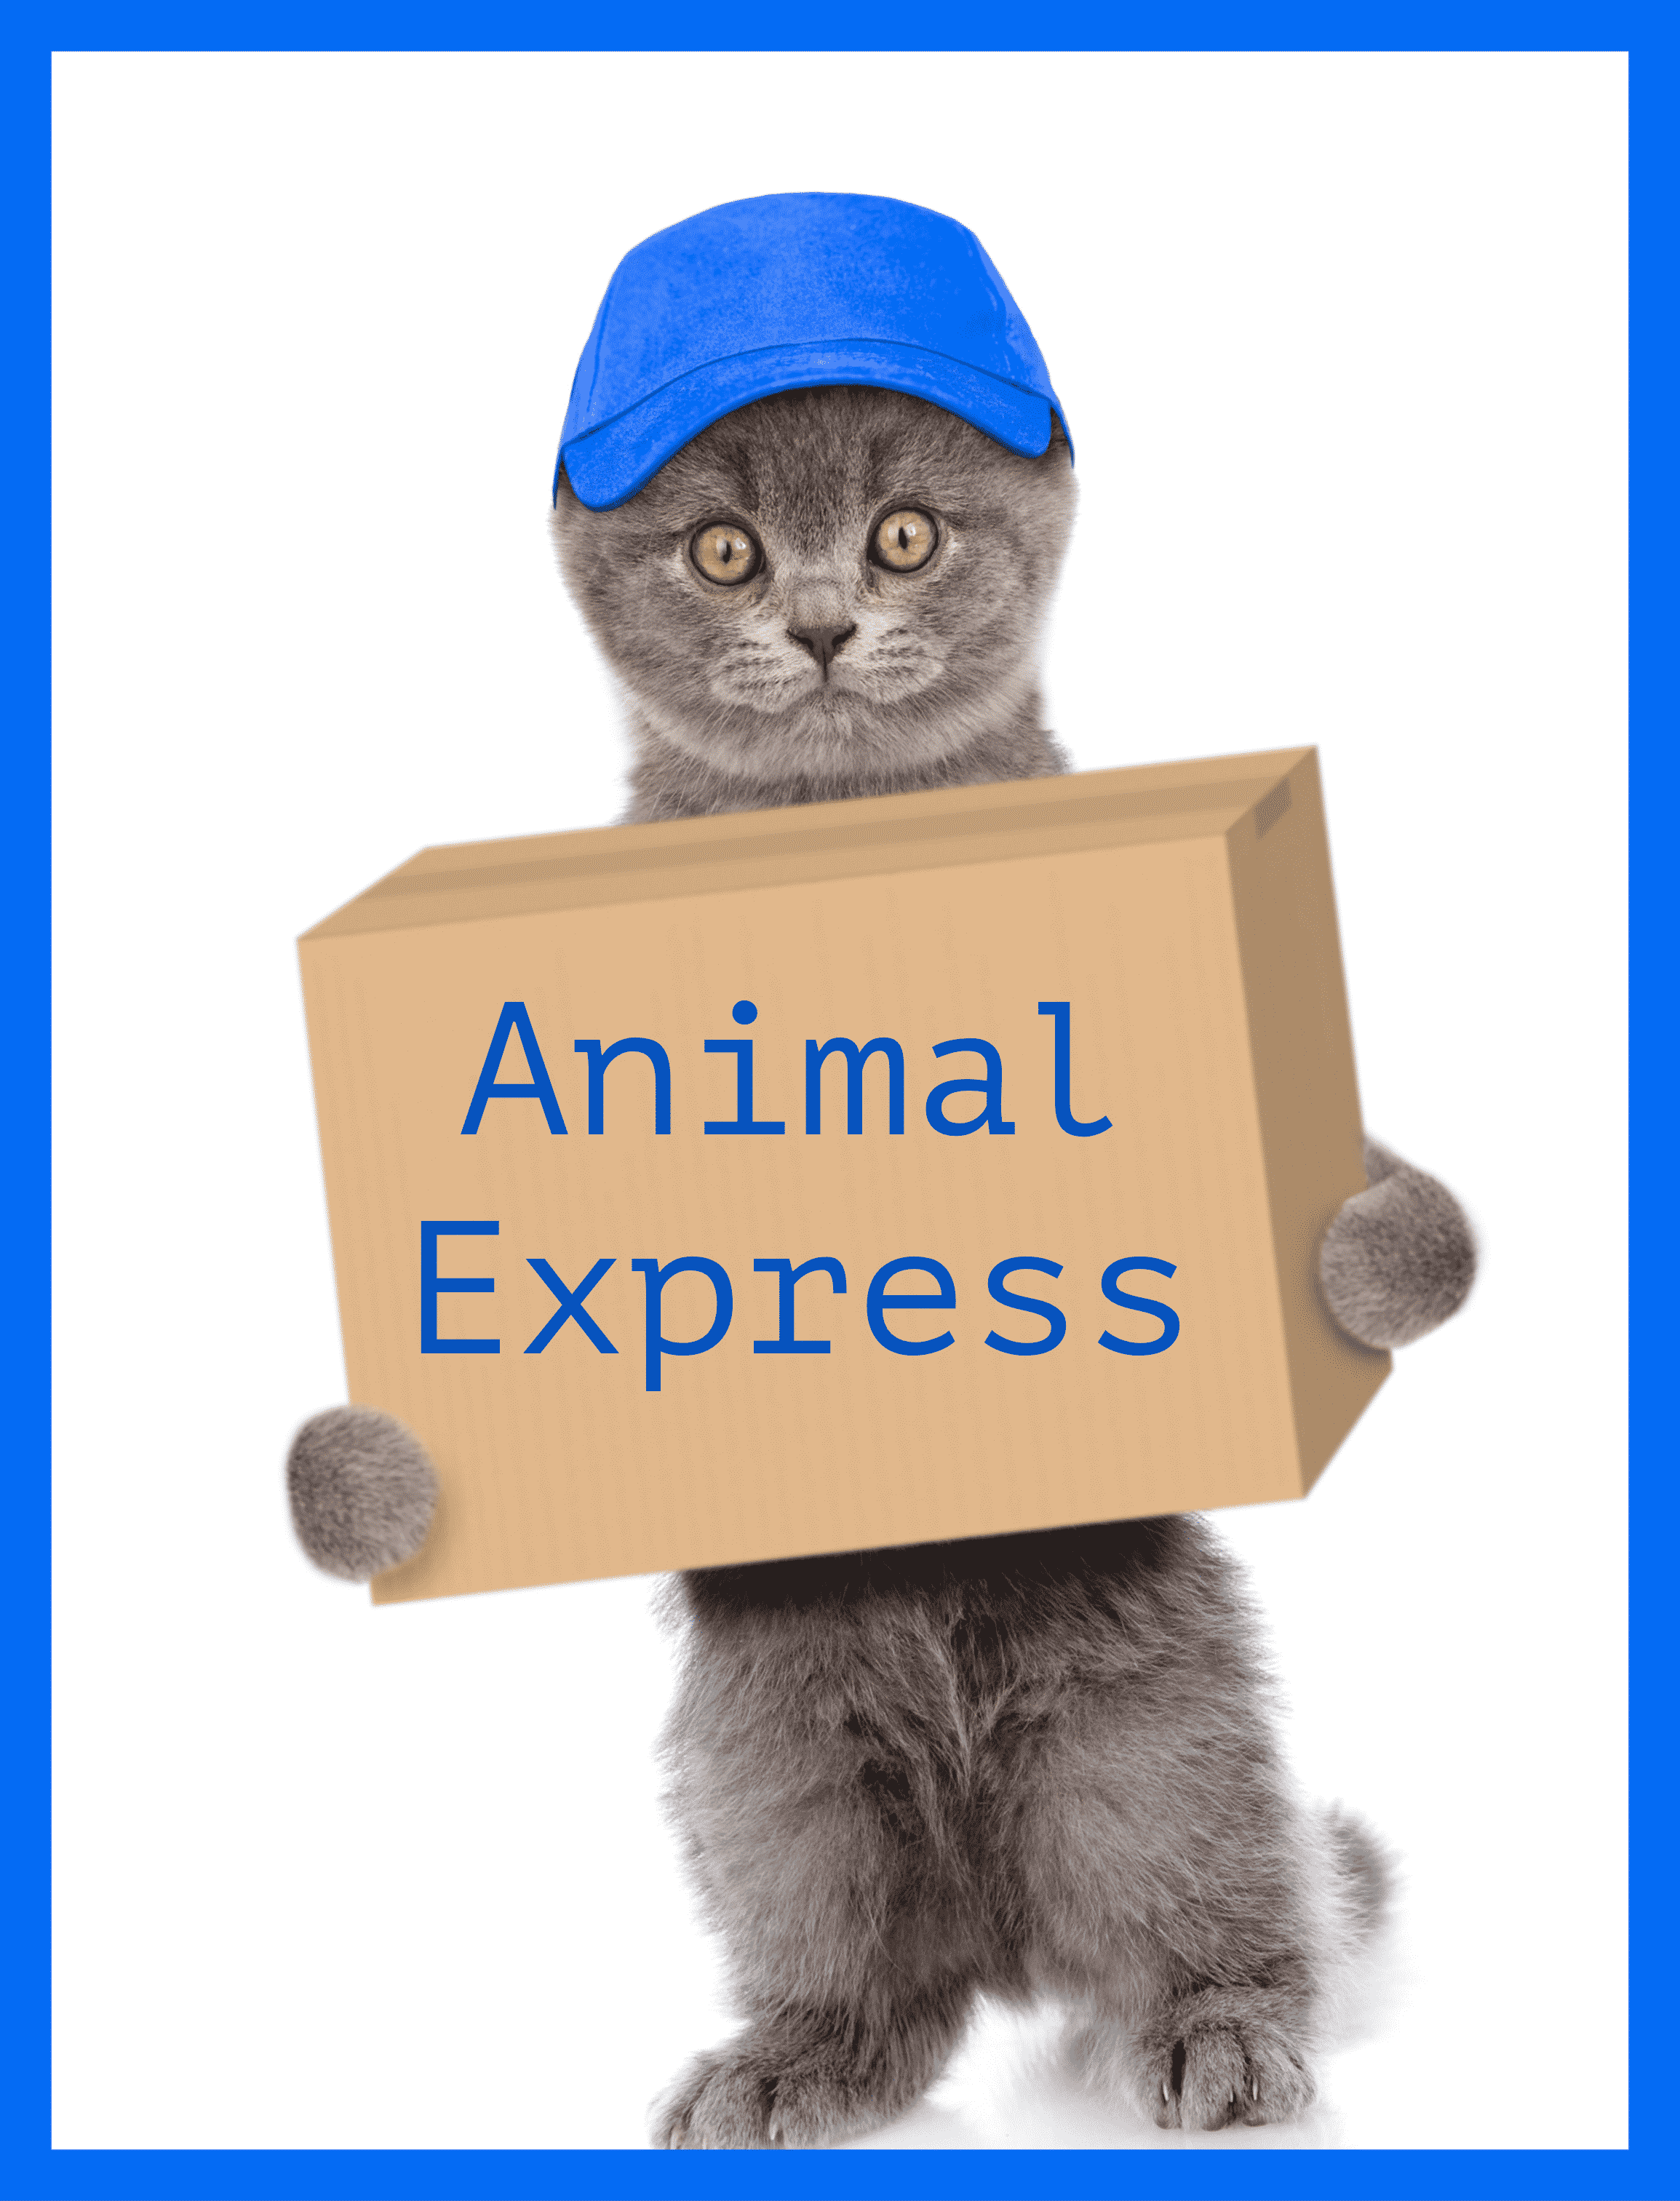 Animal Express pet couriers by road EU Spain Portugal France UK transport cats dogs rabbits ferrets